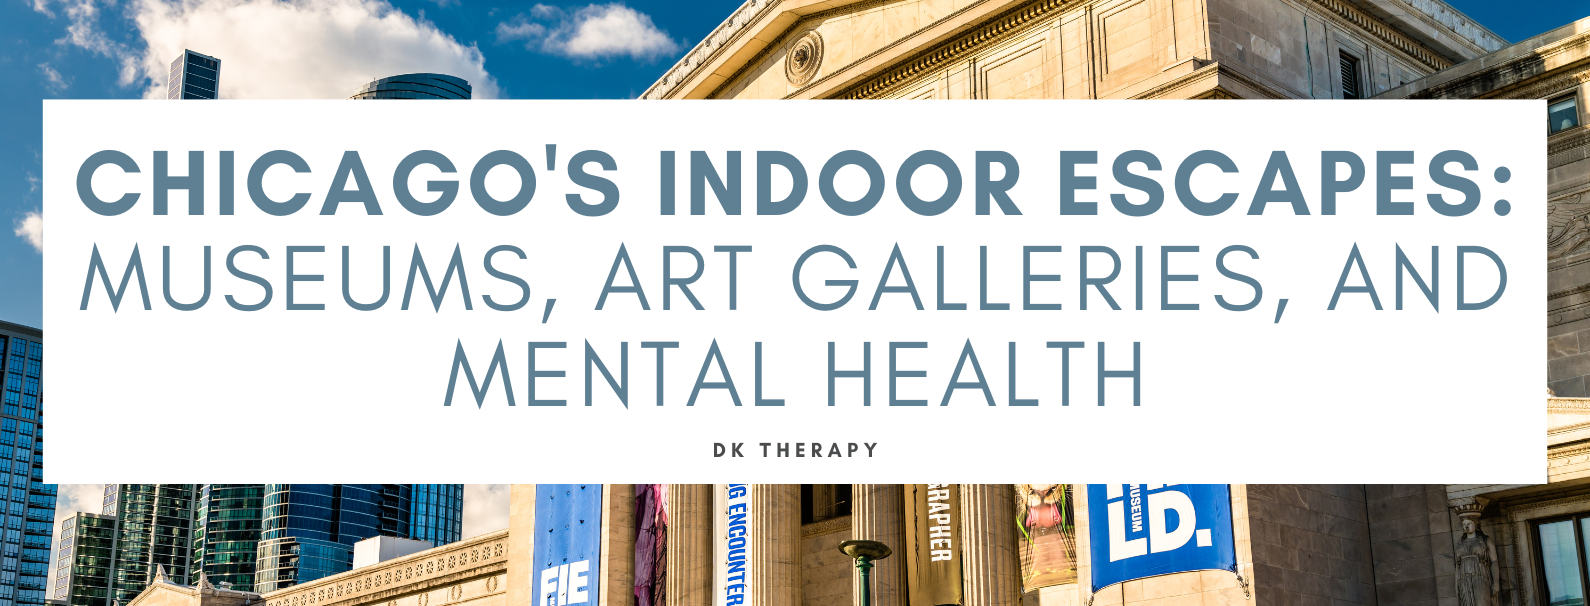 Chicago's Indoor Escapes Museums, Art Galleries, and Mental Health